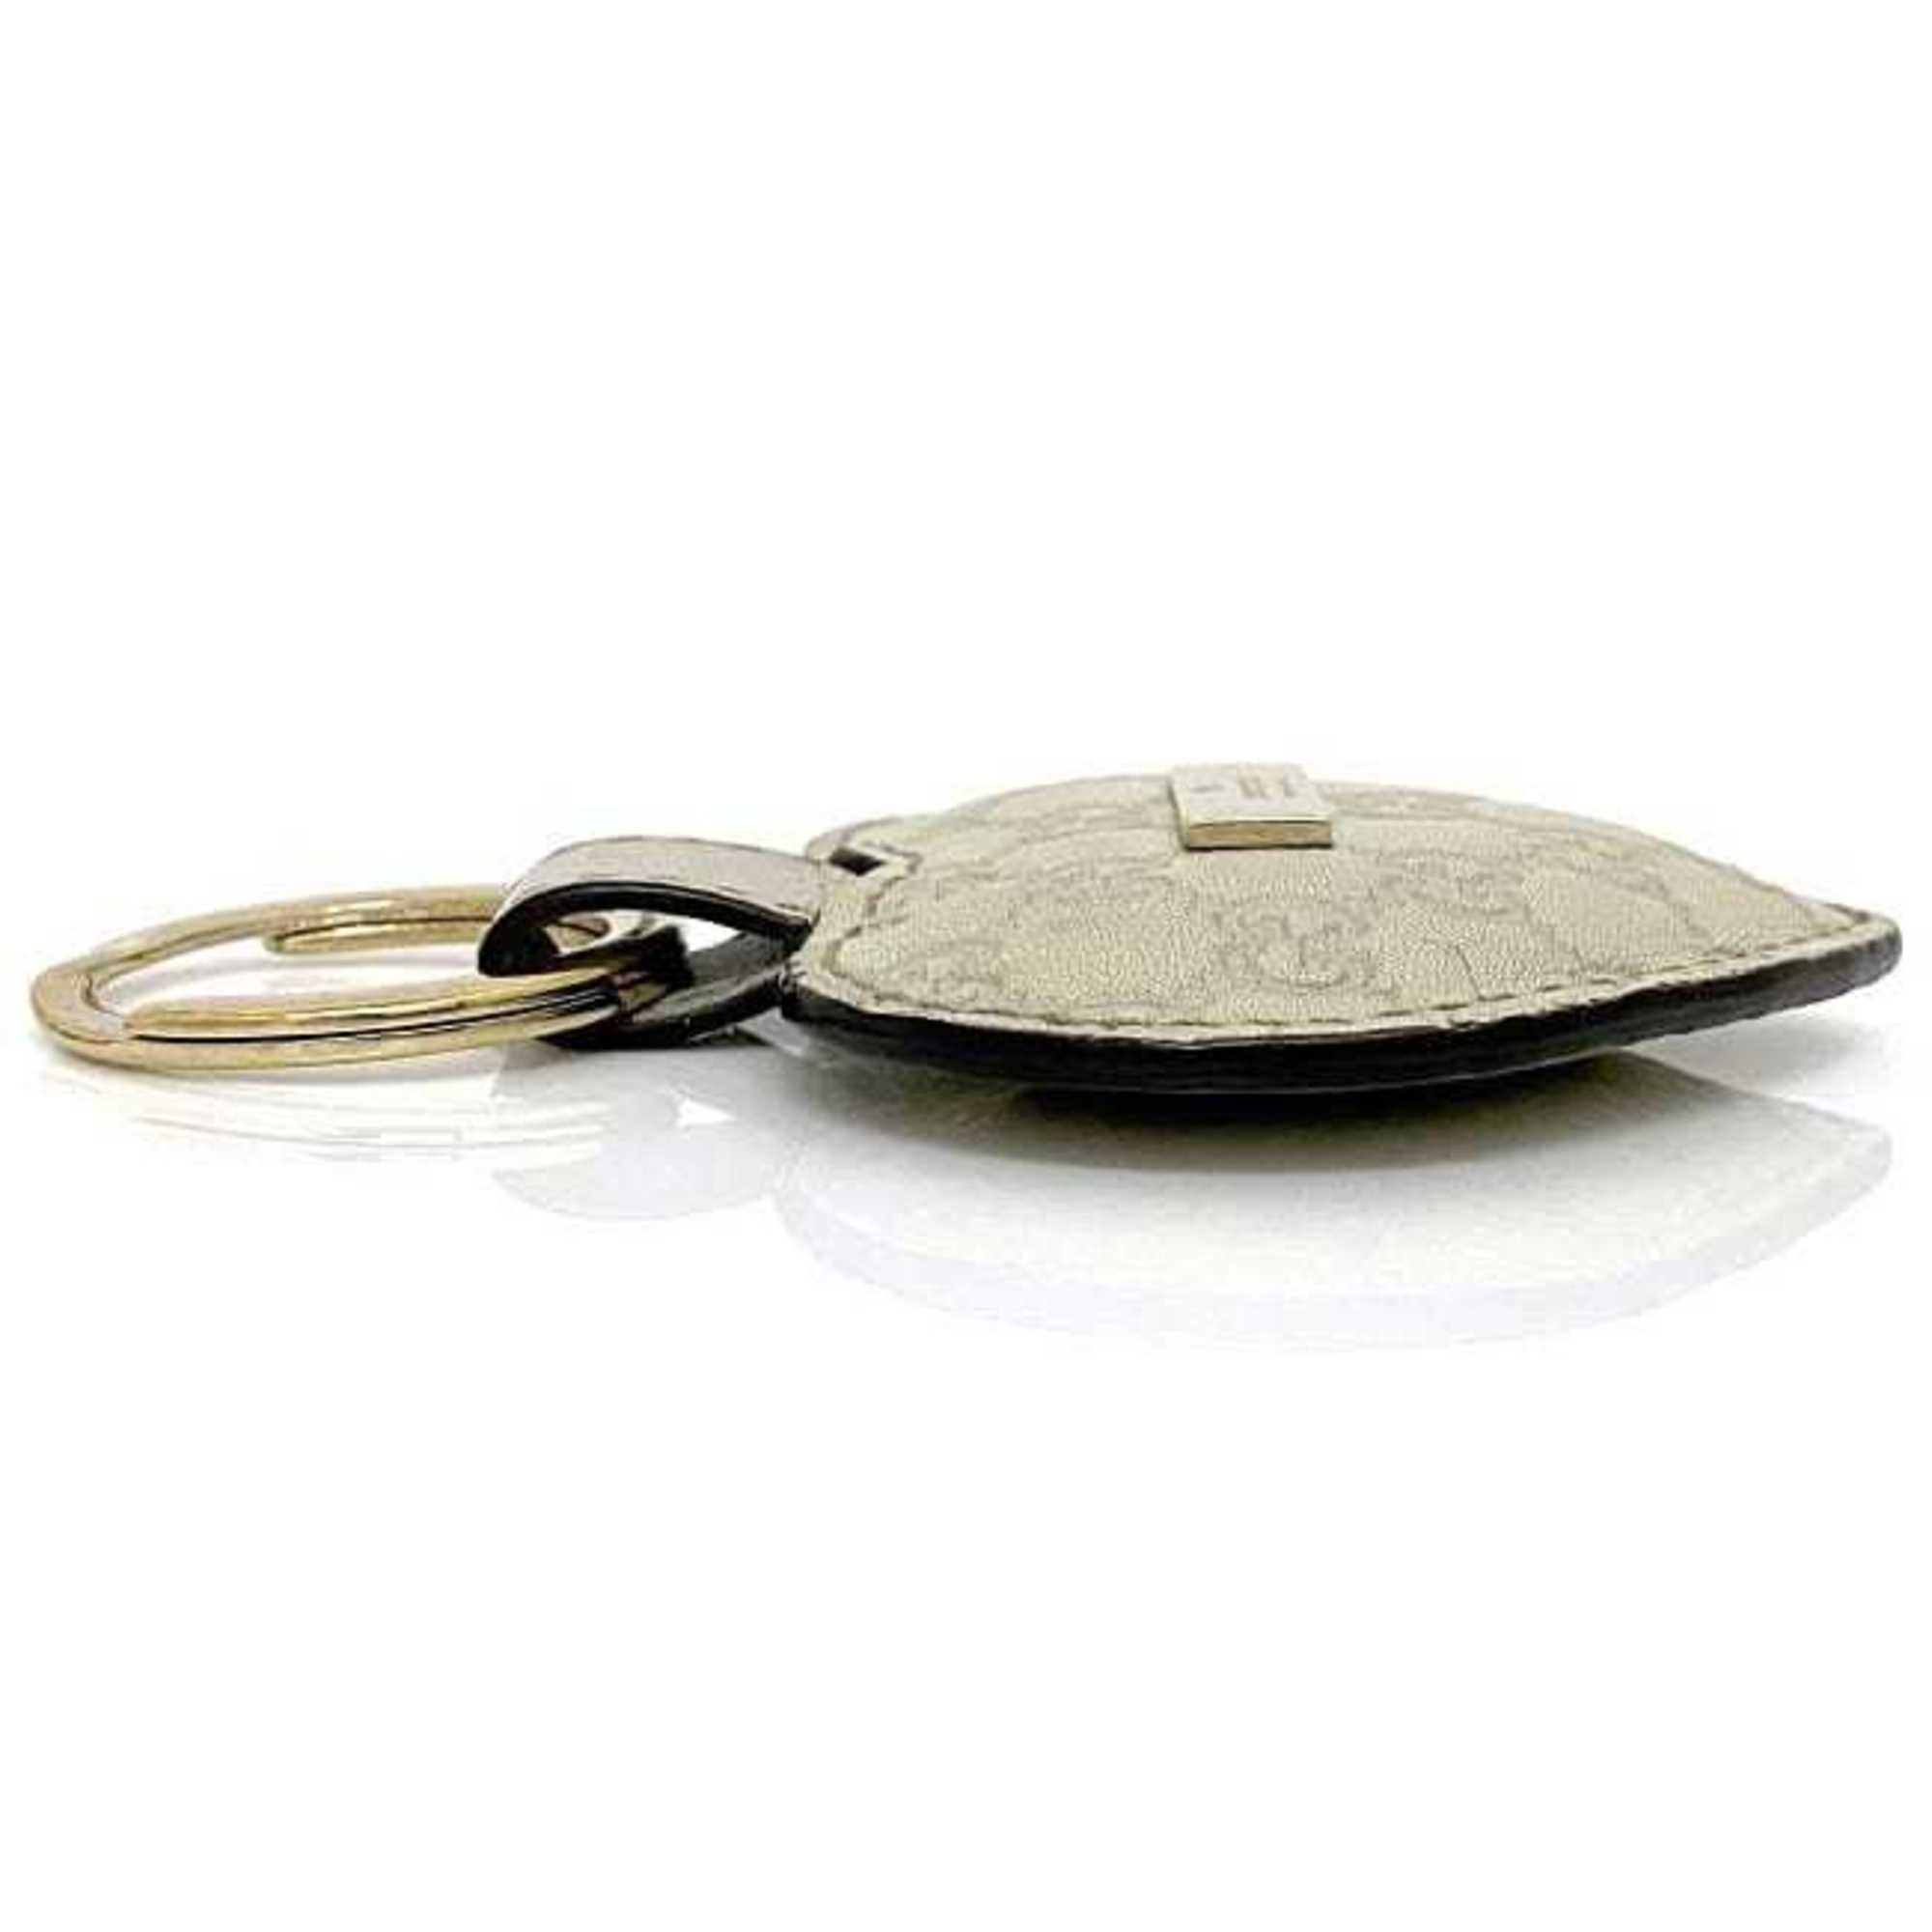 Gucci key holder beige gold sima 199915 heart GG leather GP GUCCI ring charm bag ladies